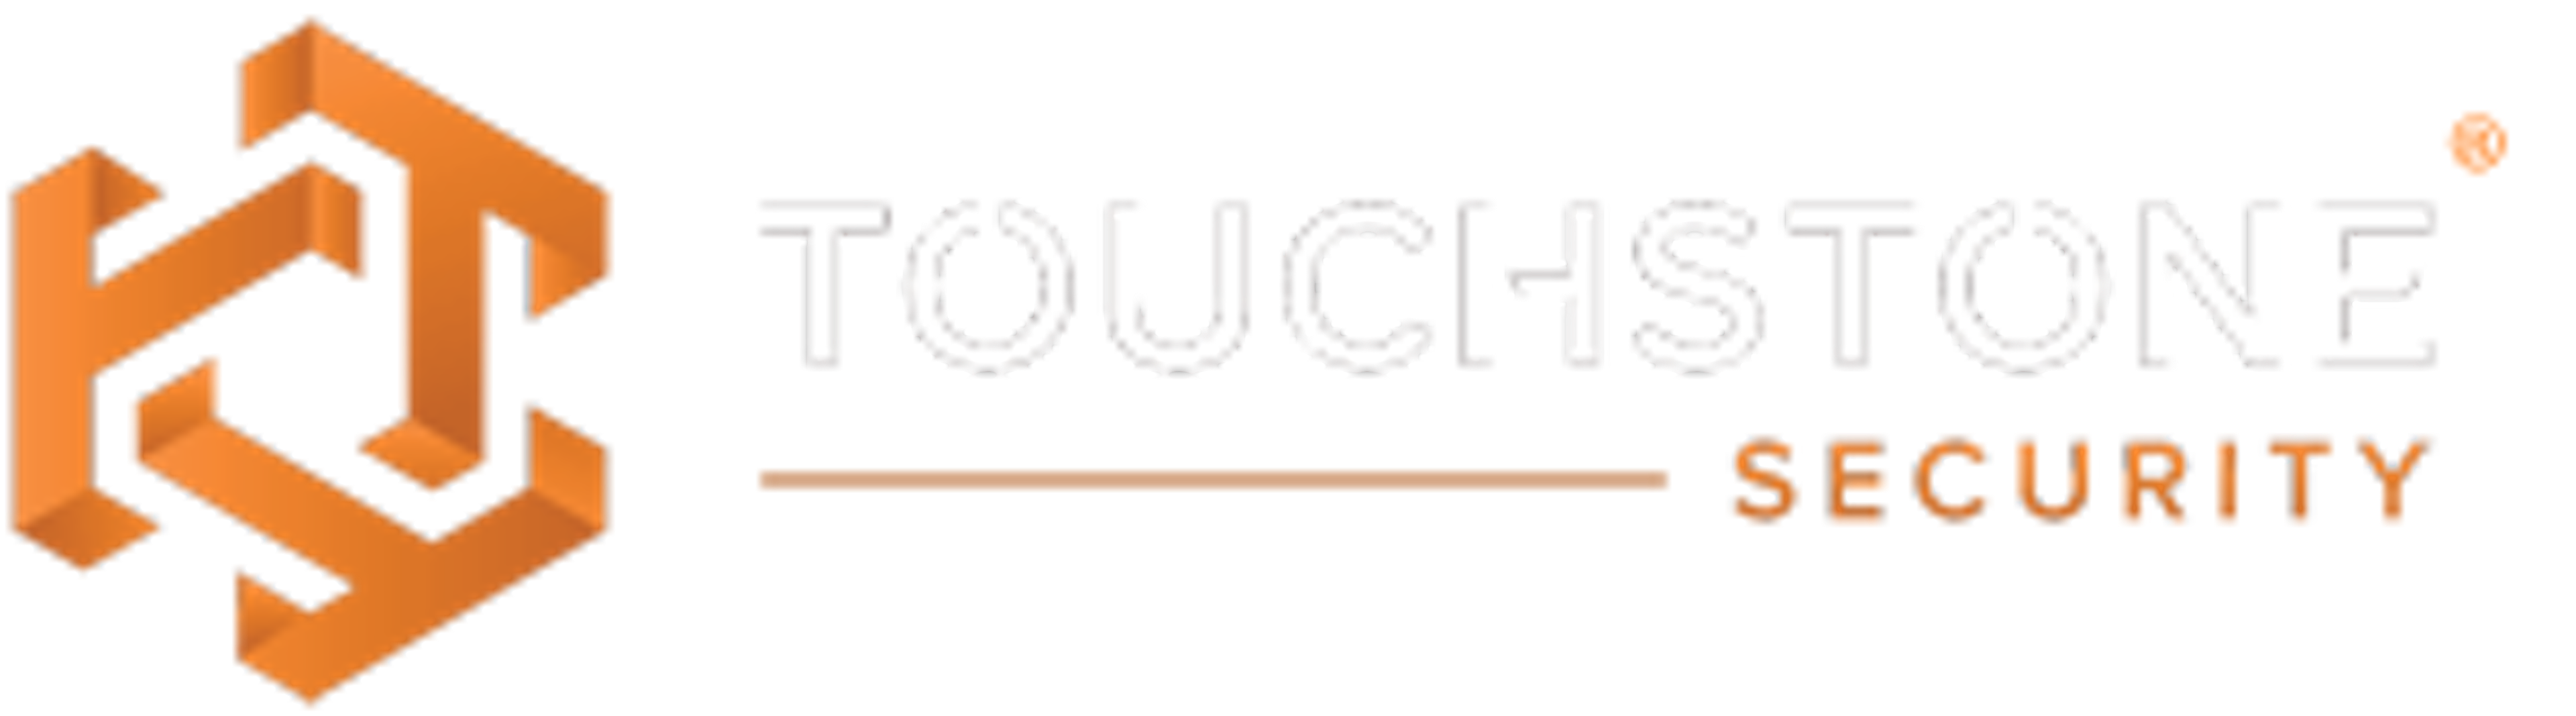 Touchstone Security